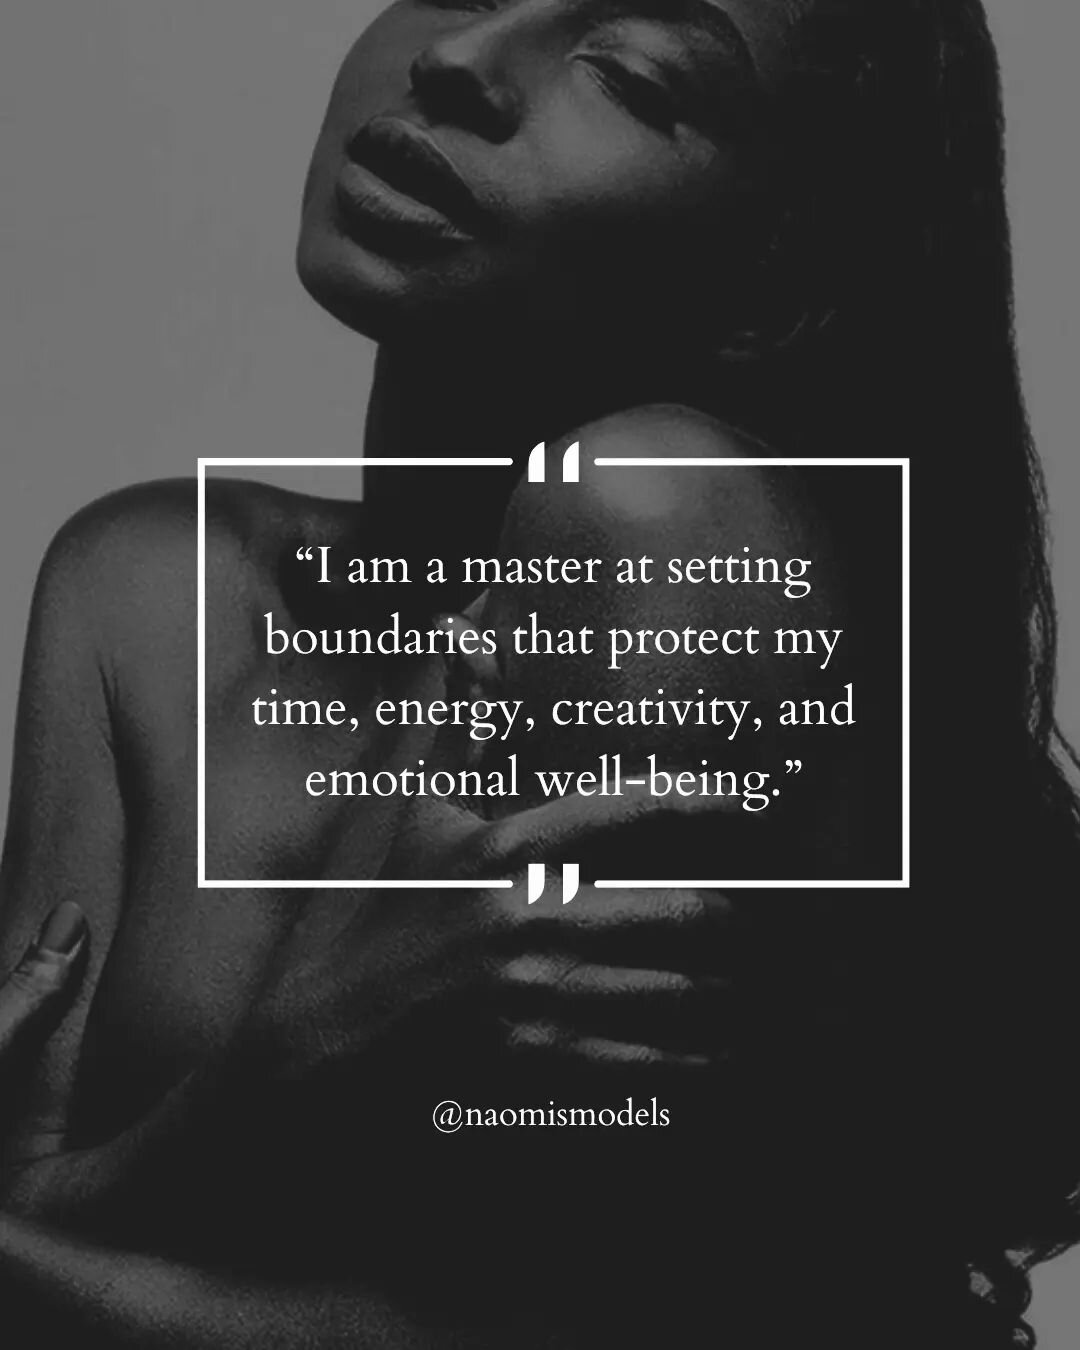 &ldquo;I am a master at setting boundaries that protect my time, energy, creativity, and emotional well-being.&rdquo;

#naomismodels #quoteoftheday #inspiration #motivation #models #nycmodels #castingagency #modelscout #selflove #selfcare